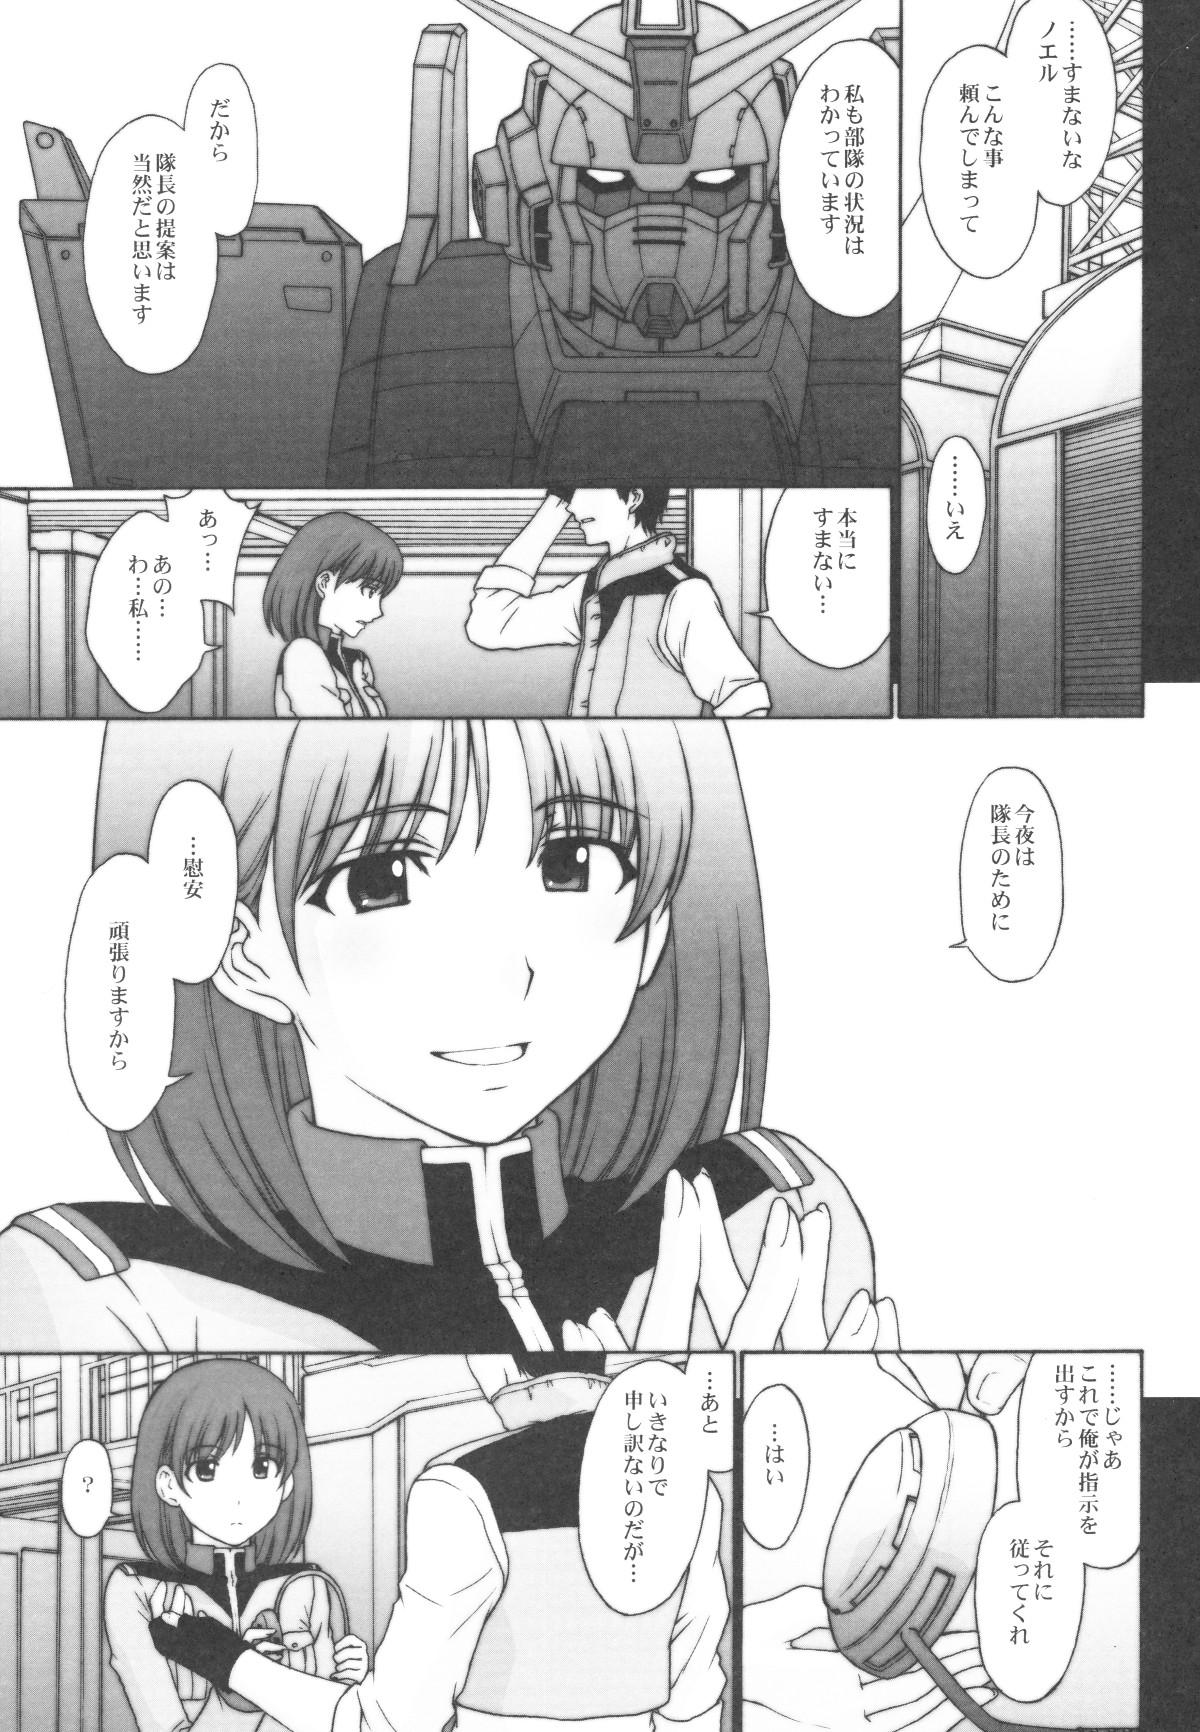 Naturaltits E.F.S.F. Lost War Chronicles - Mobile suit gundam lost war chronicles Mature Woman - Page 3